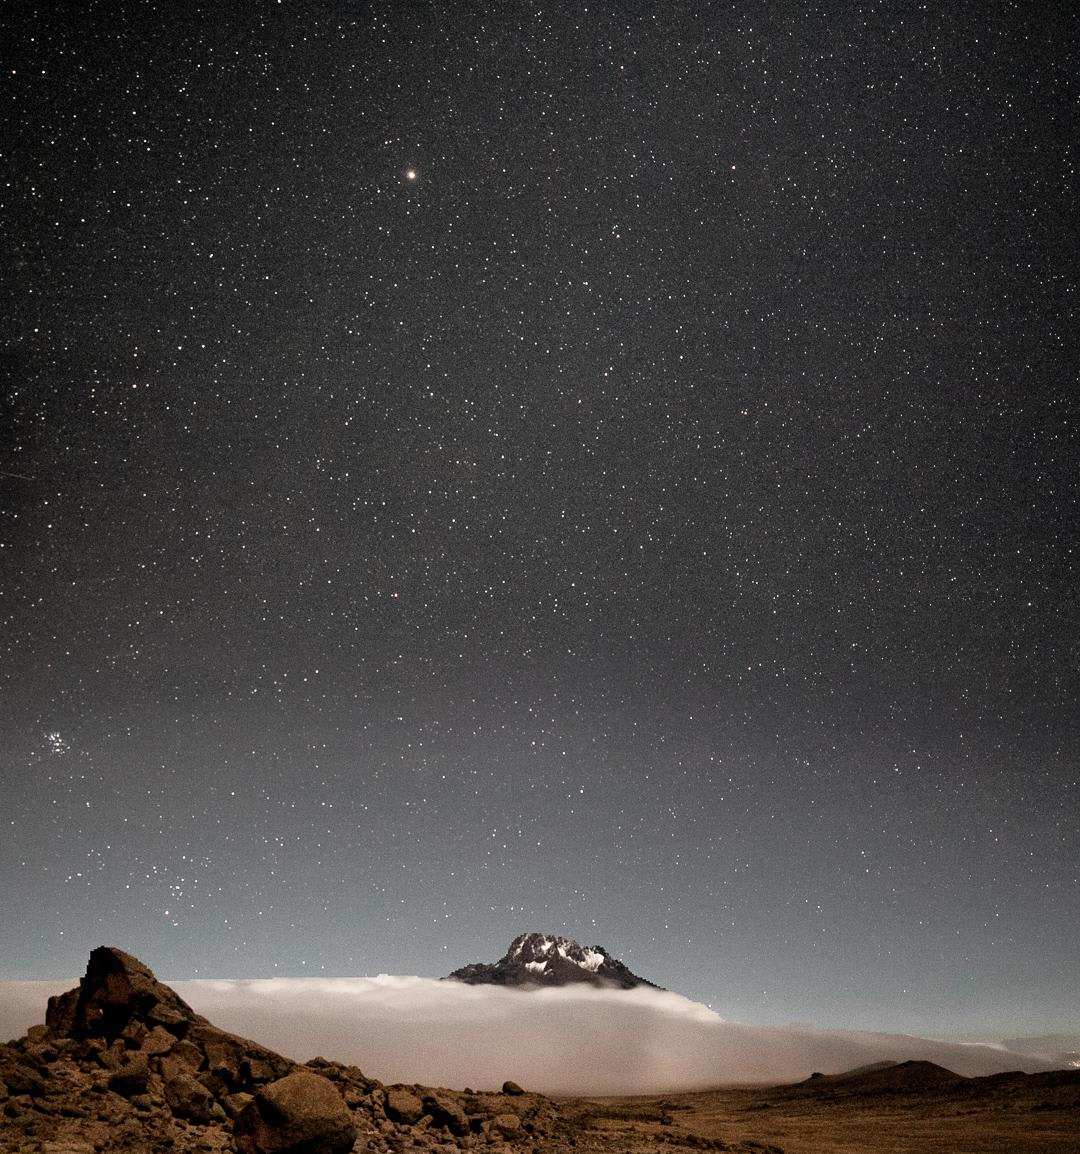 Summit night on Kilimanjaro, looking back towards her second tallest crater - Mt. Mawenzi